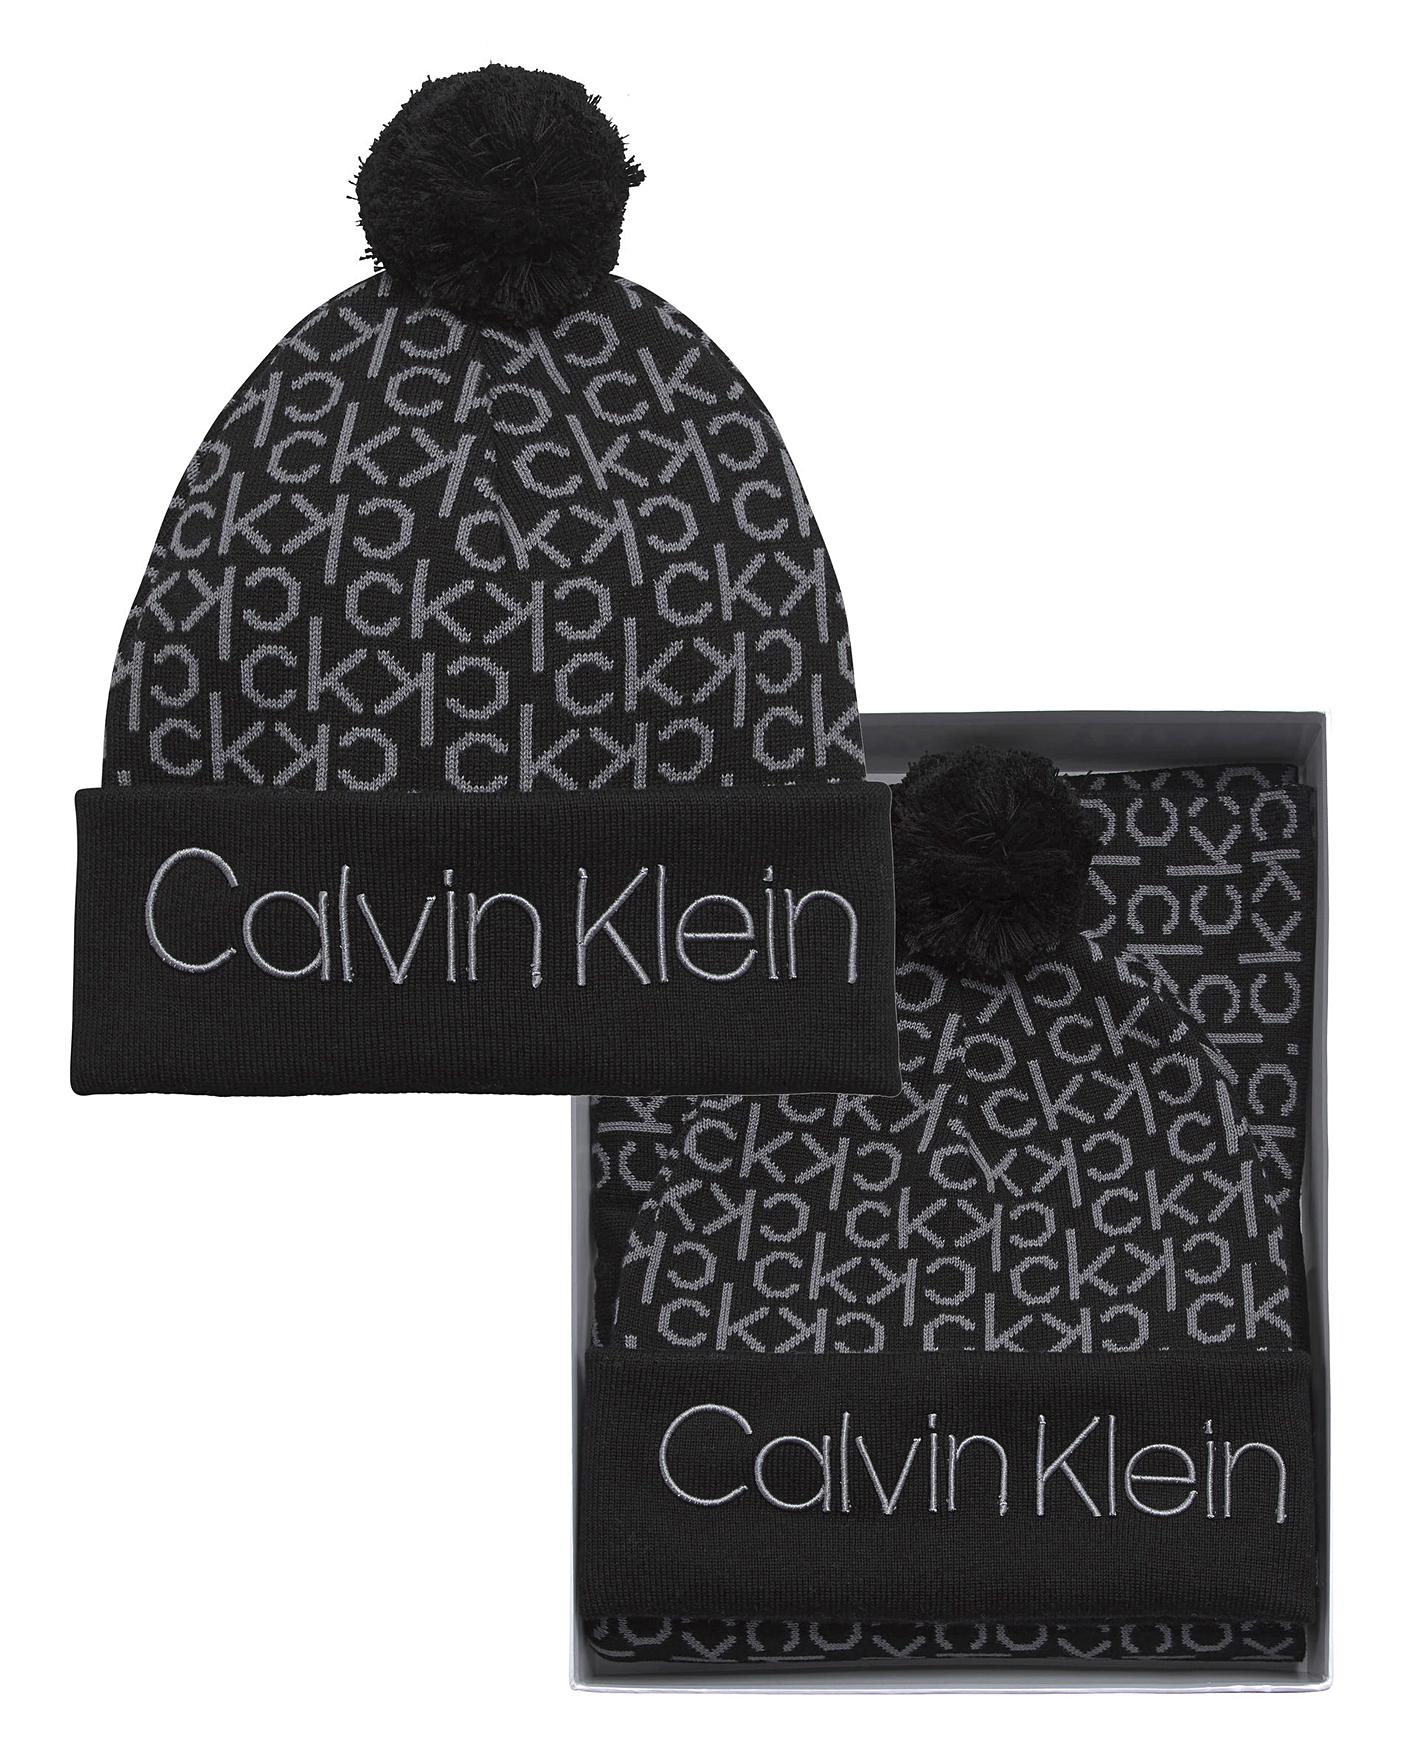 calvin klein hat and scarf